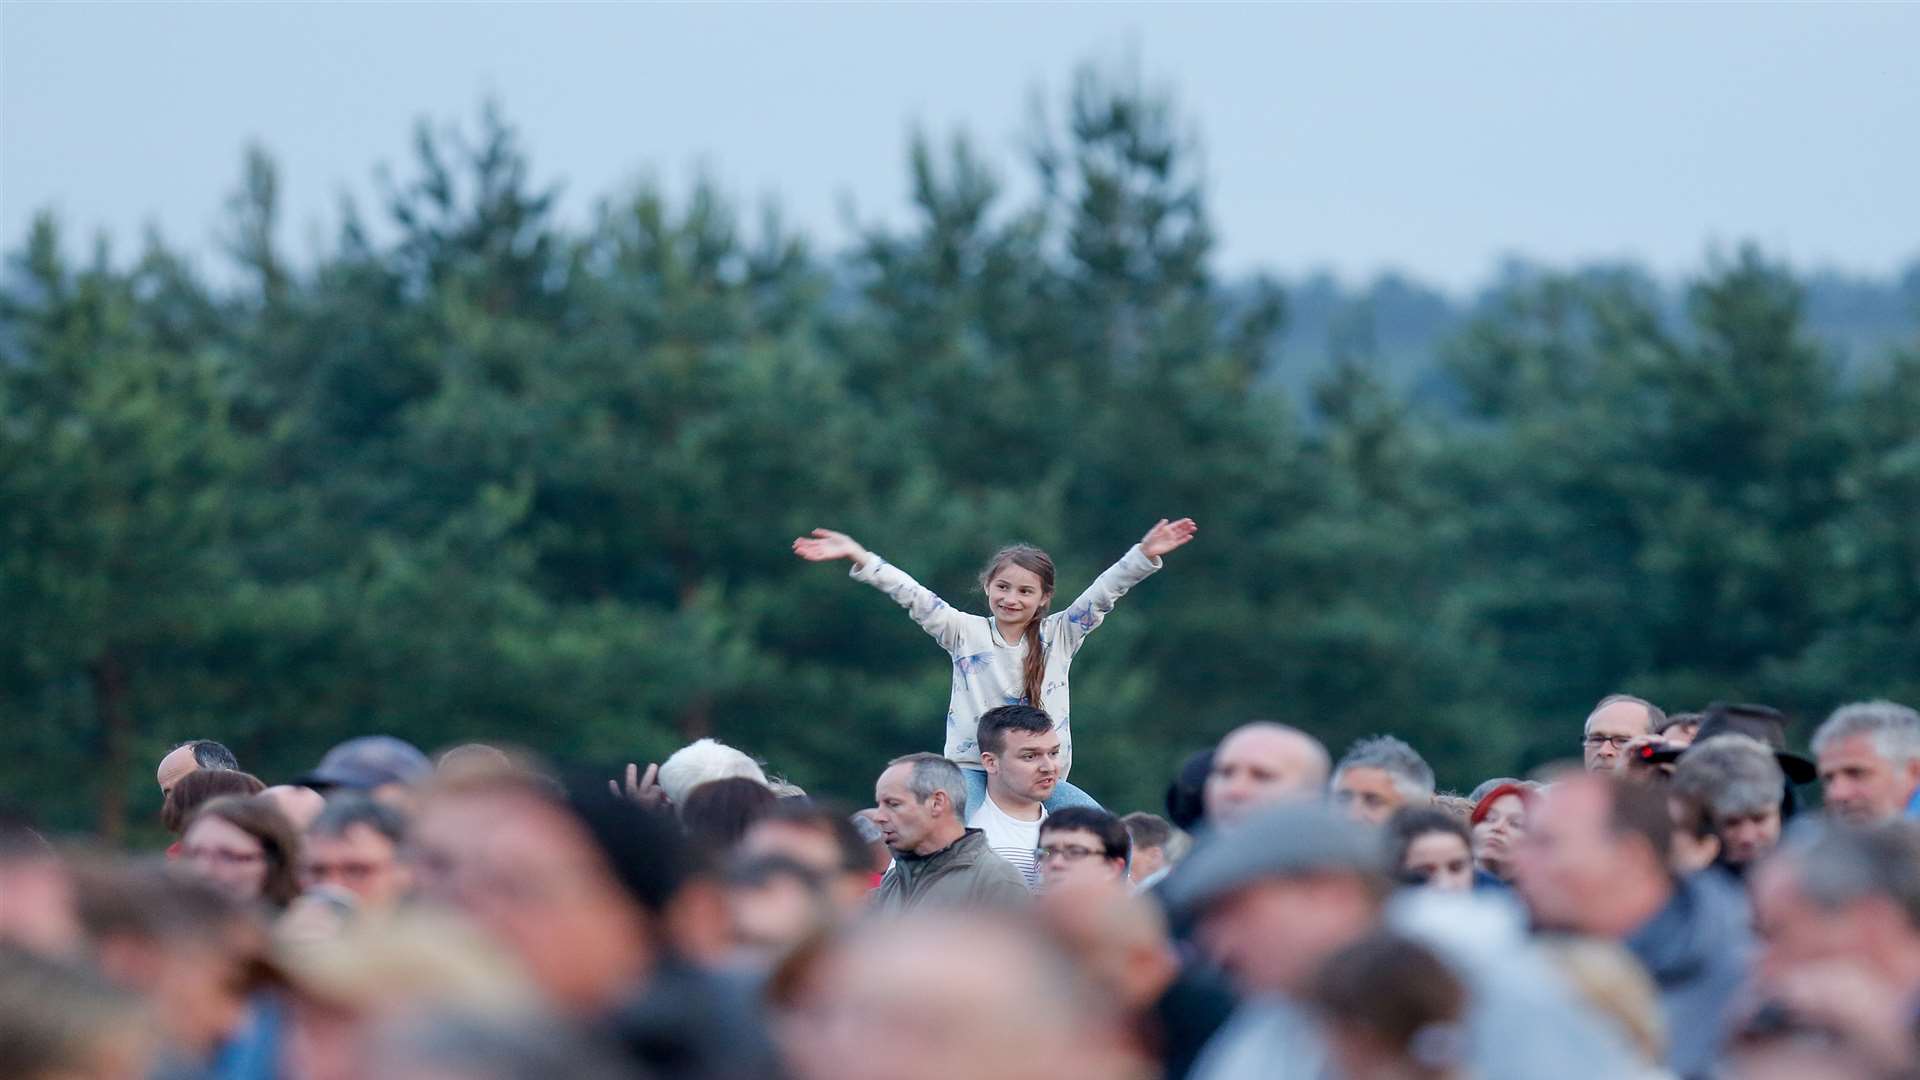 The Forest Live concerts have a relaxed, family-friendly feel Picture: Matthew Walker